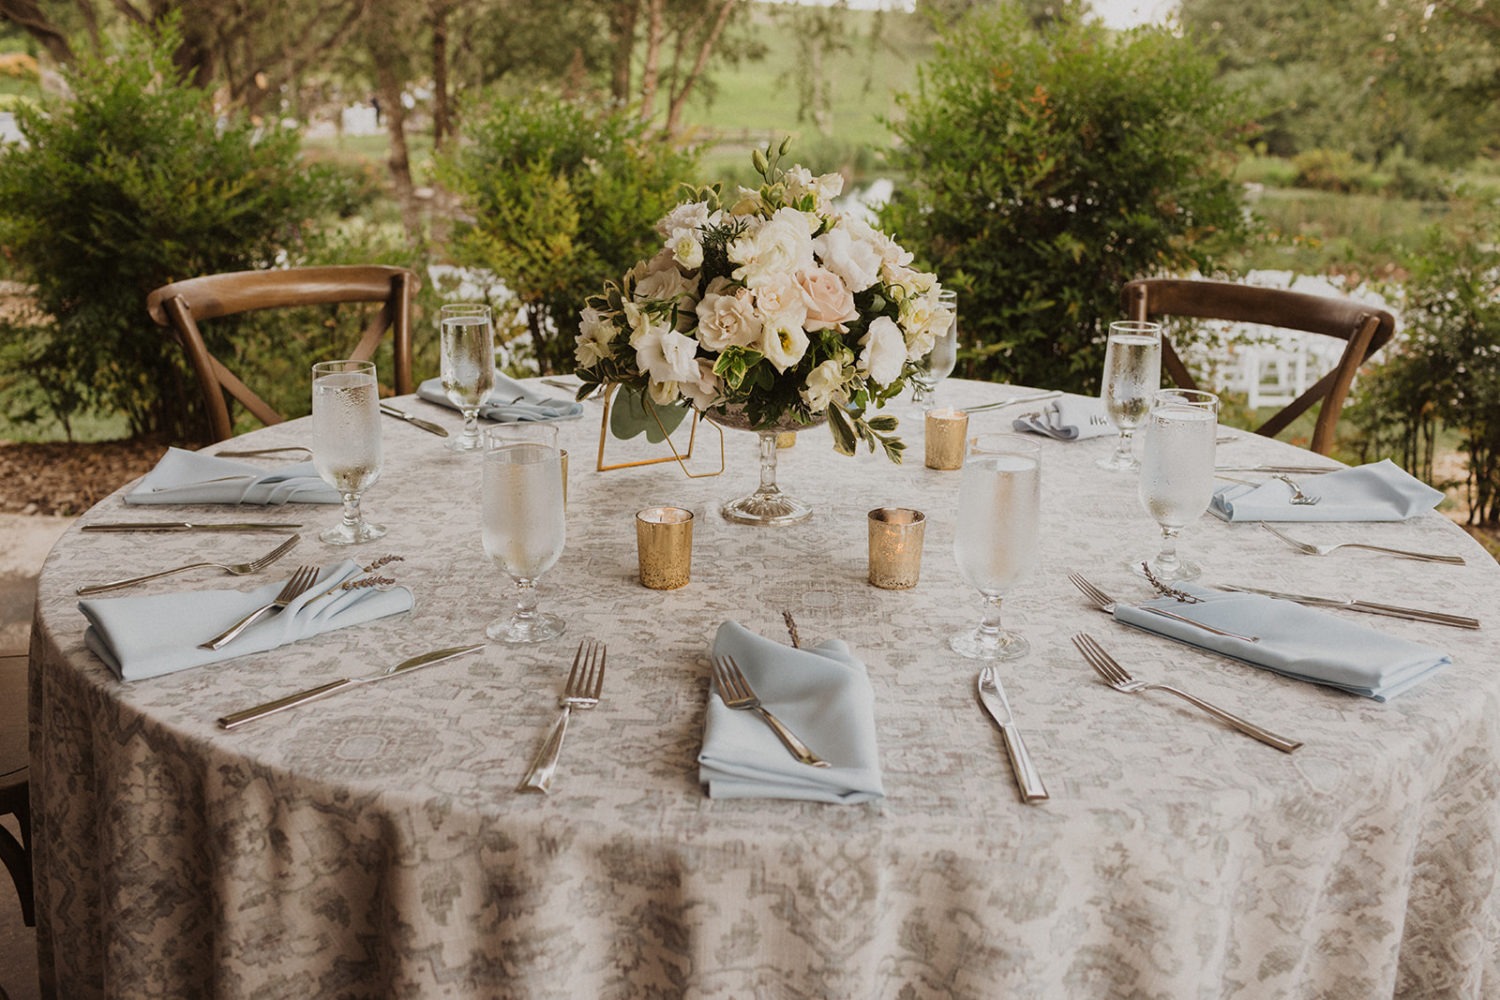 floral table settings at tented wedding reception